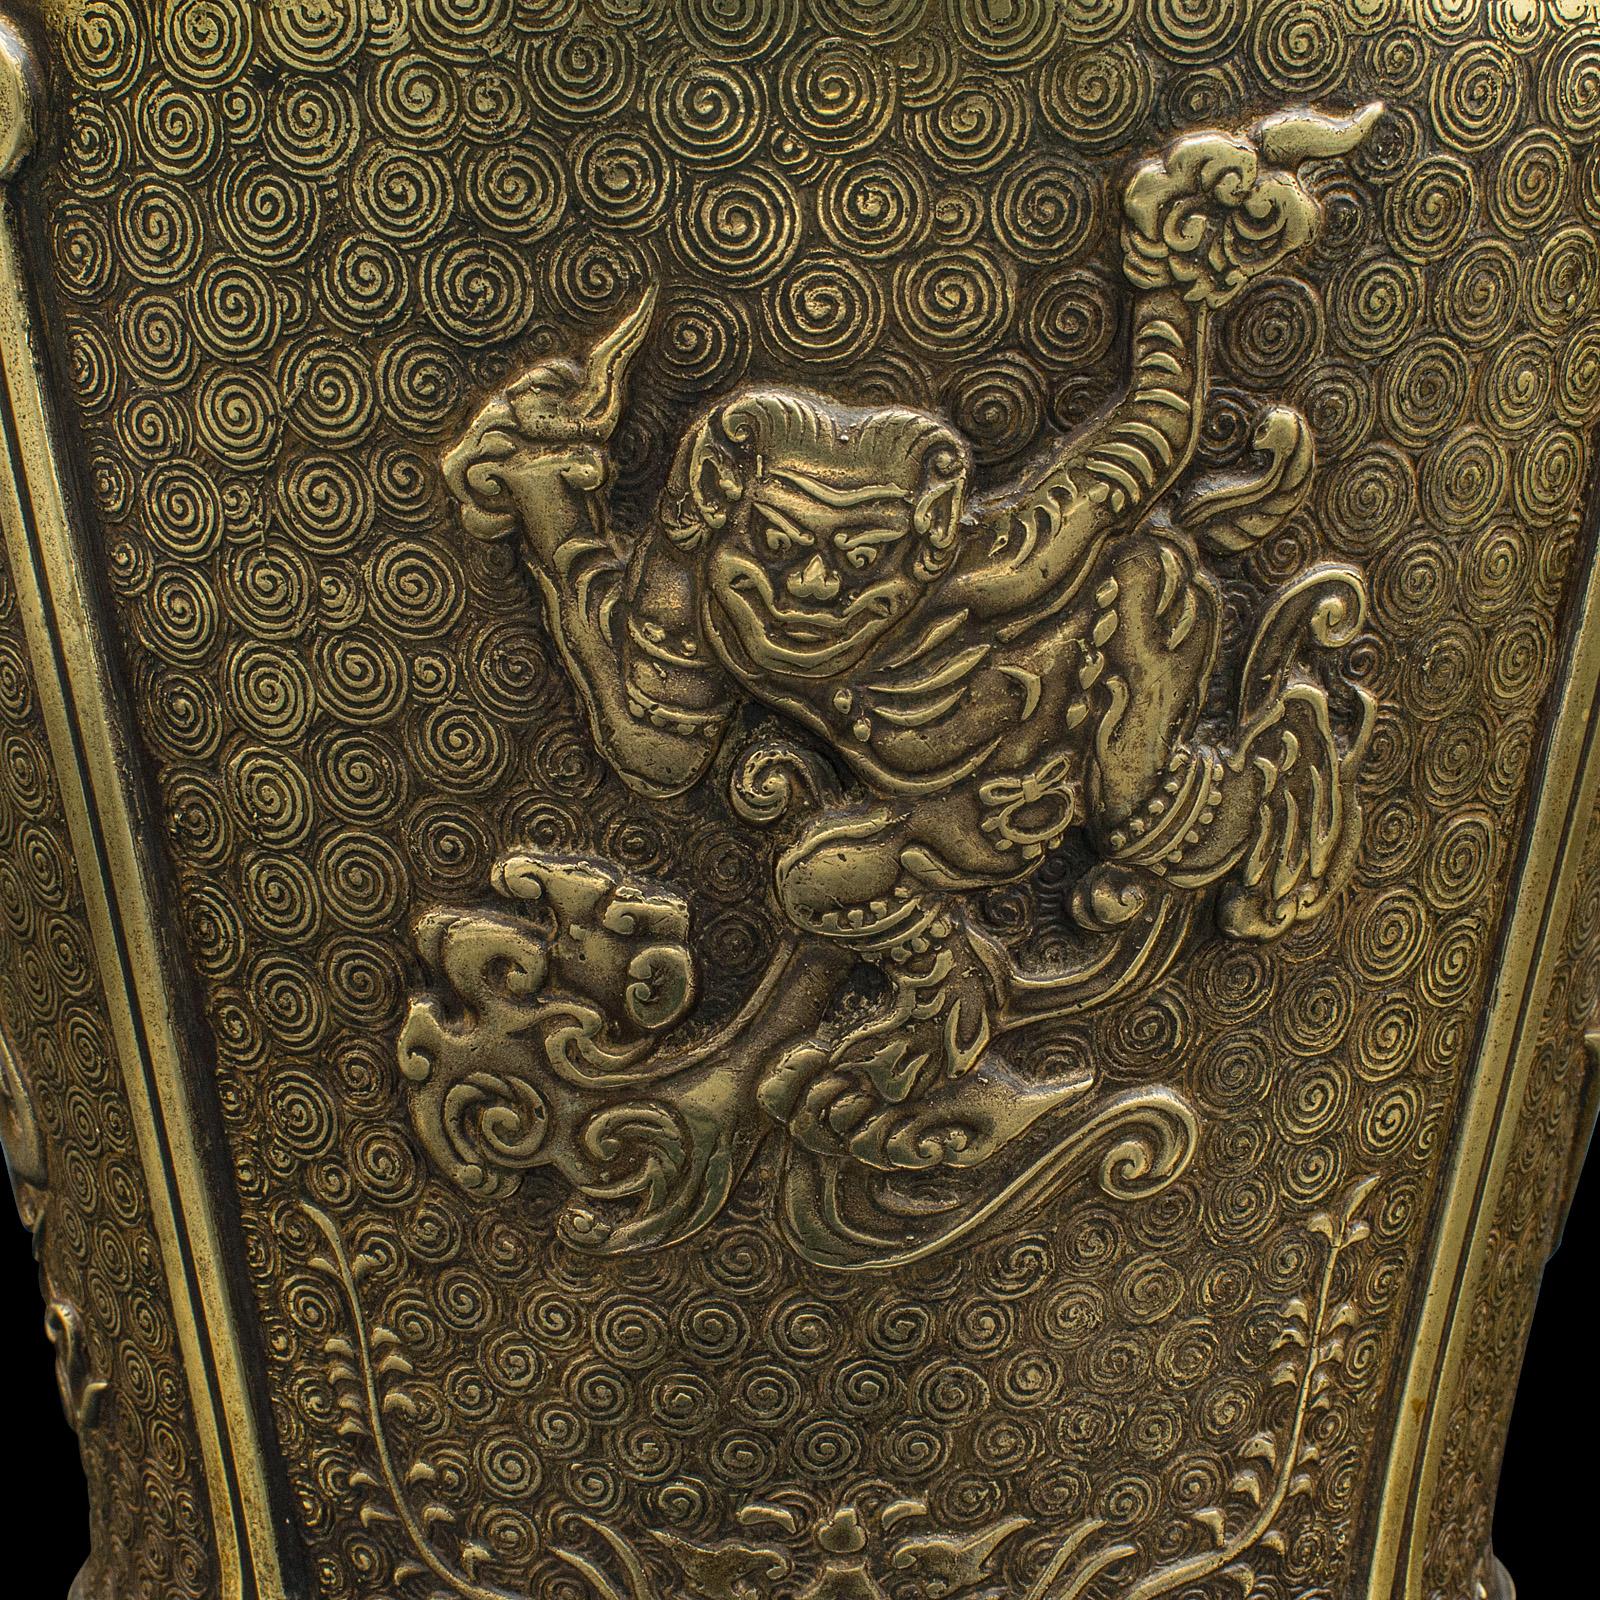 Antique Decorative Planter, Chinese, Bronze, Jardiniere, Qing Dynasty, Victorian For Sale 4